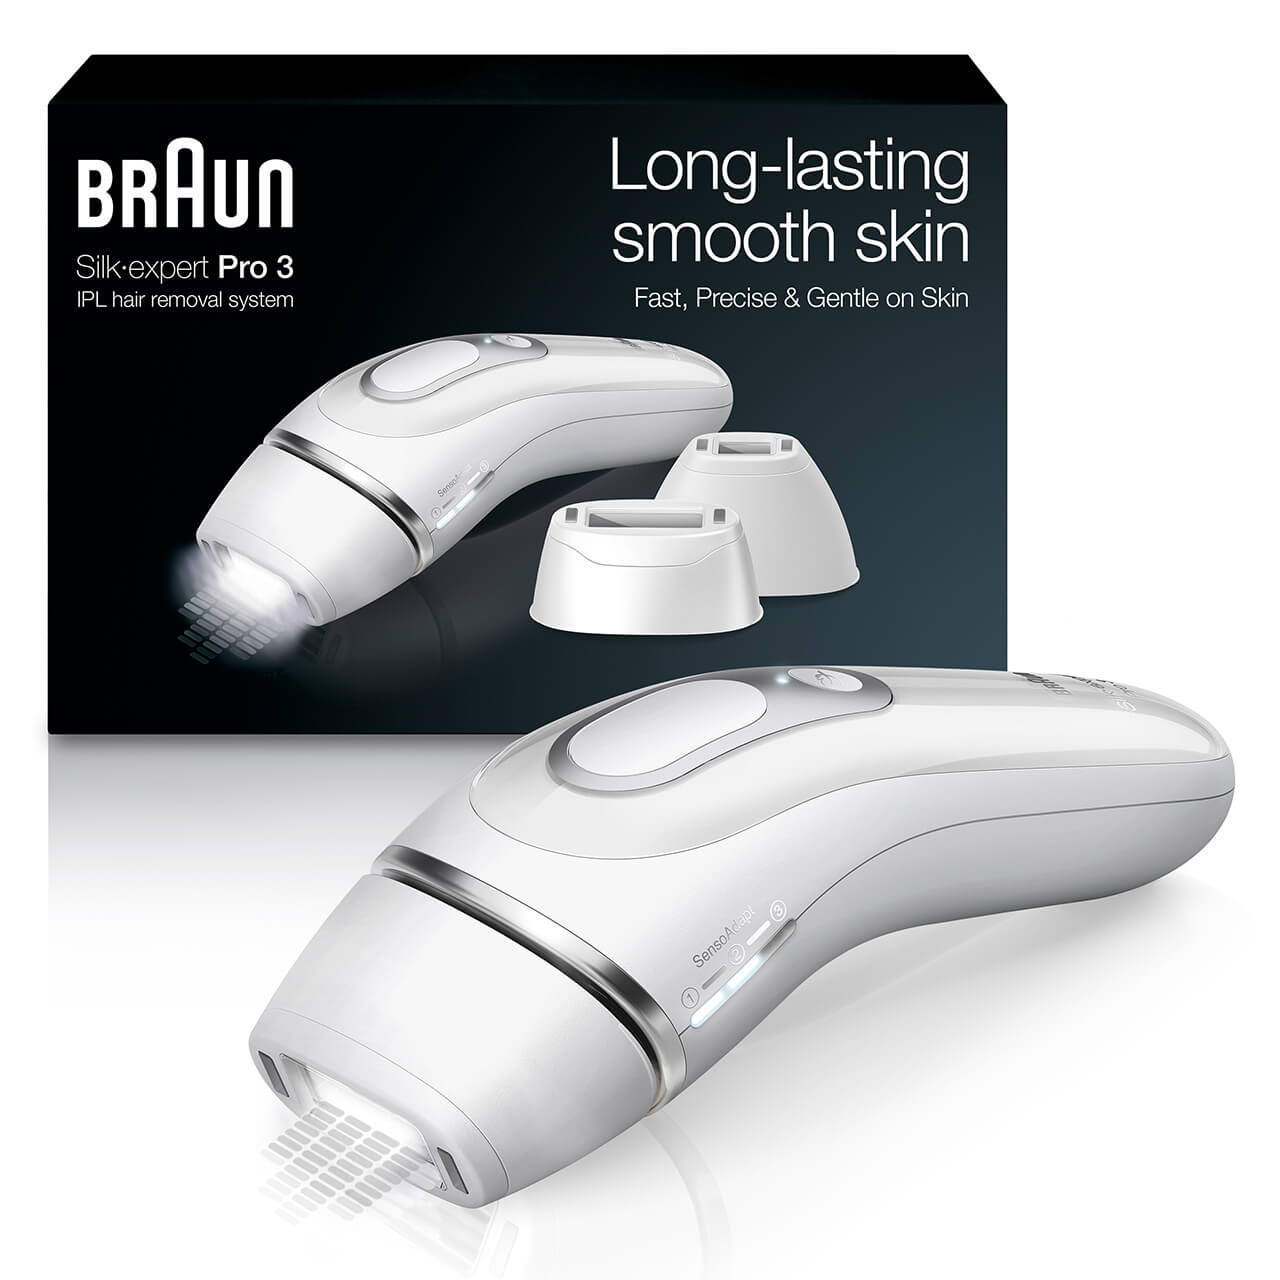 Silk-expert Pro 5 IPL with Wide and Precision Cap | Braun